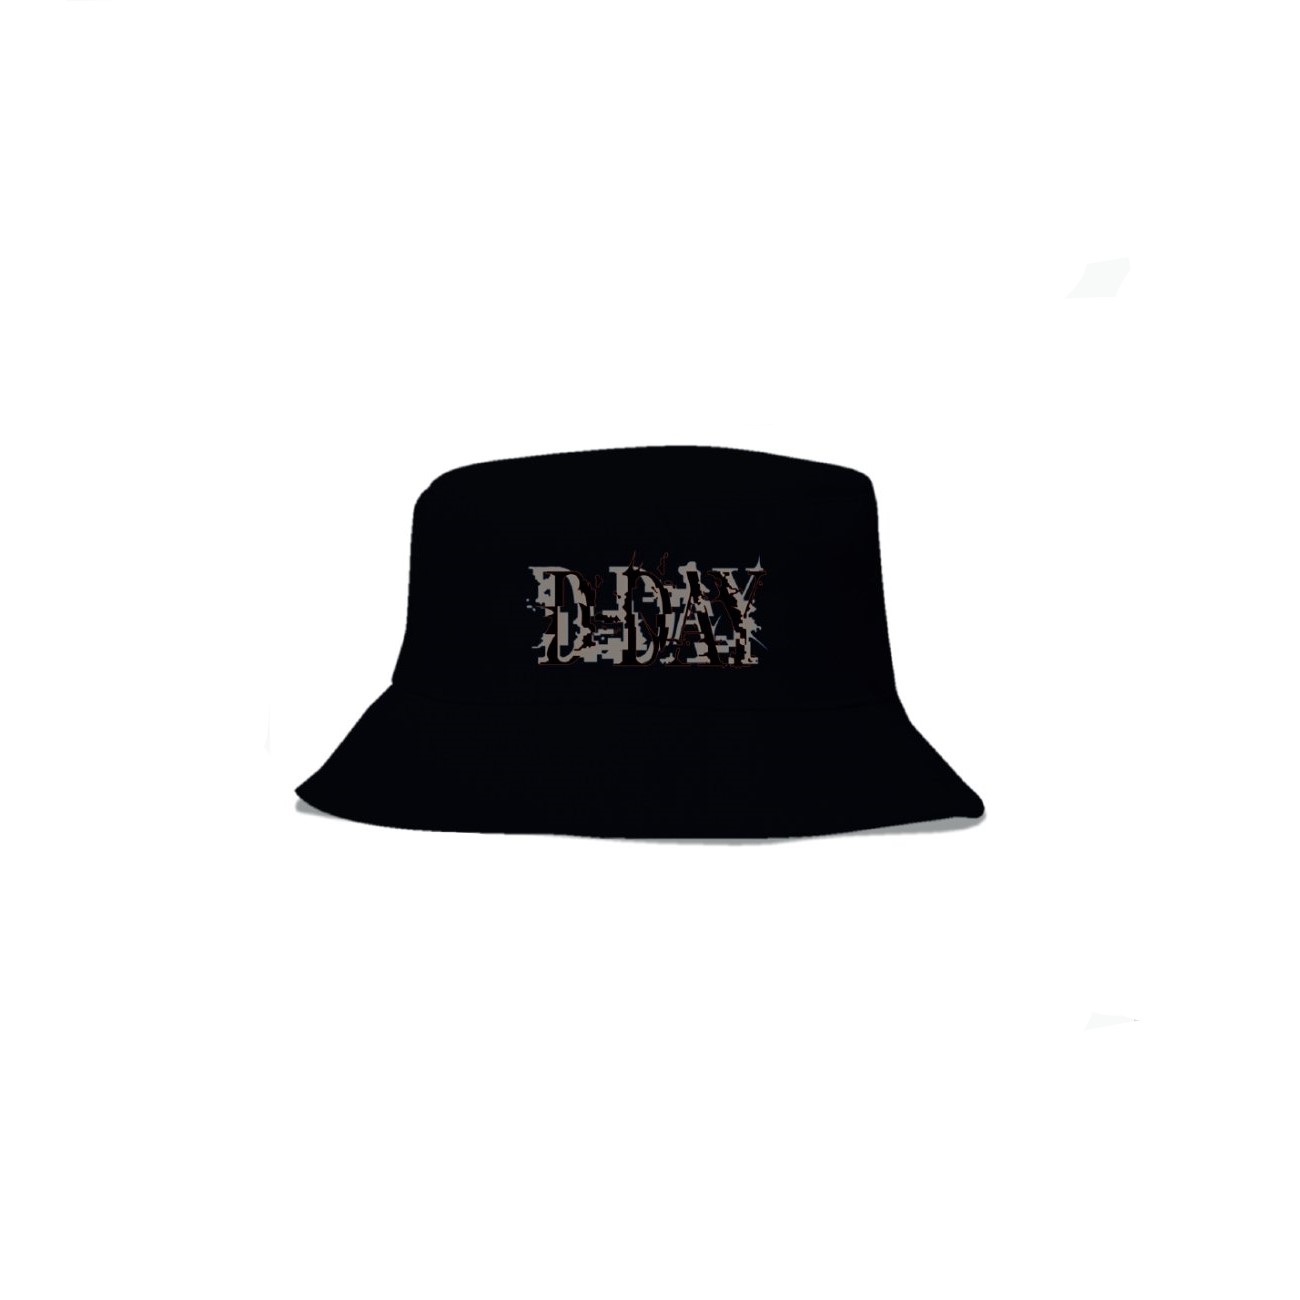 BTS SUGA Agust D TOUR 'D-DAY' in SINGAPORE Bucket Hat